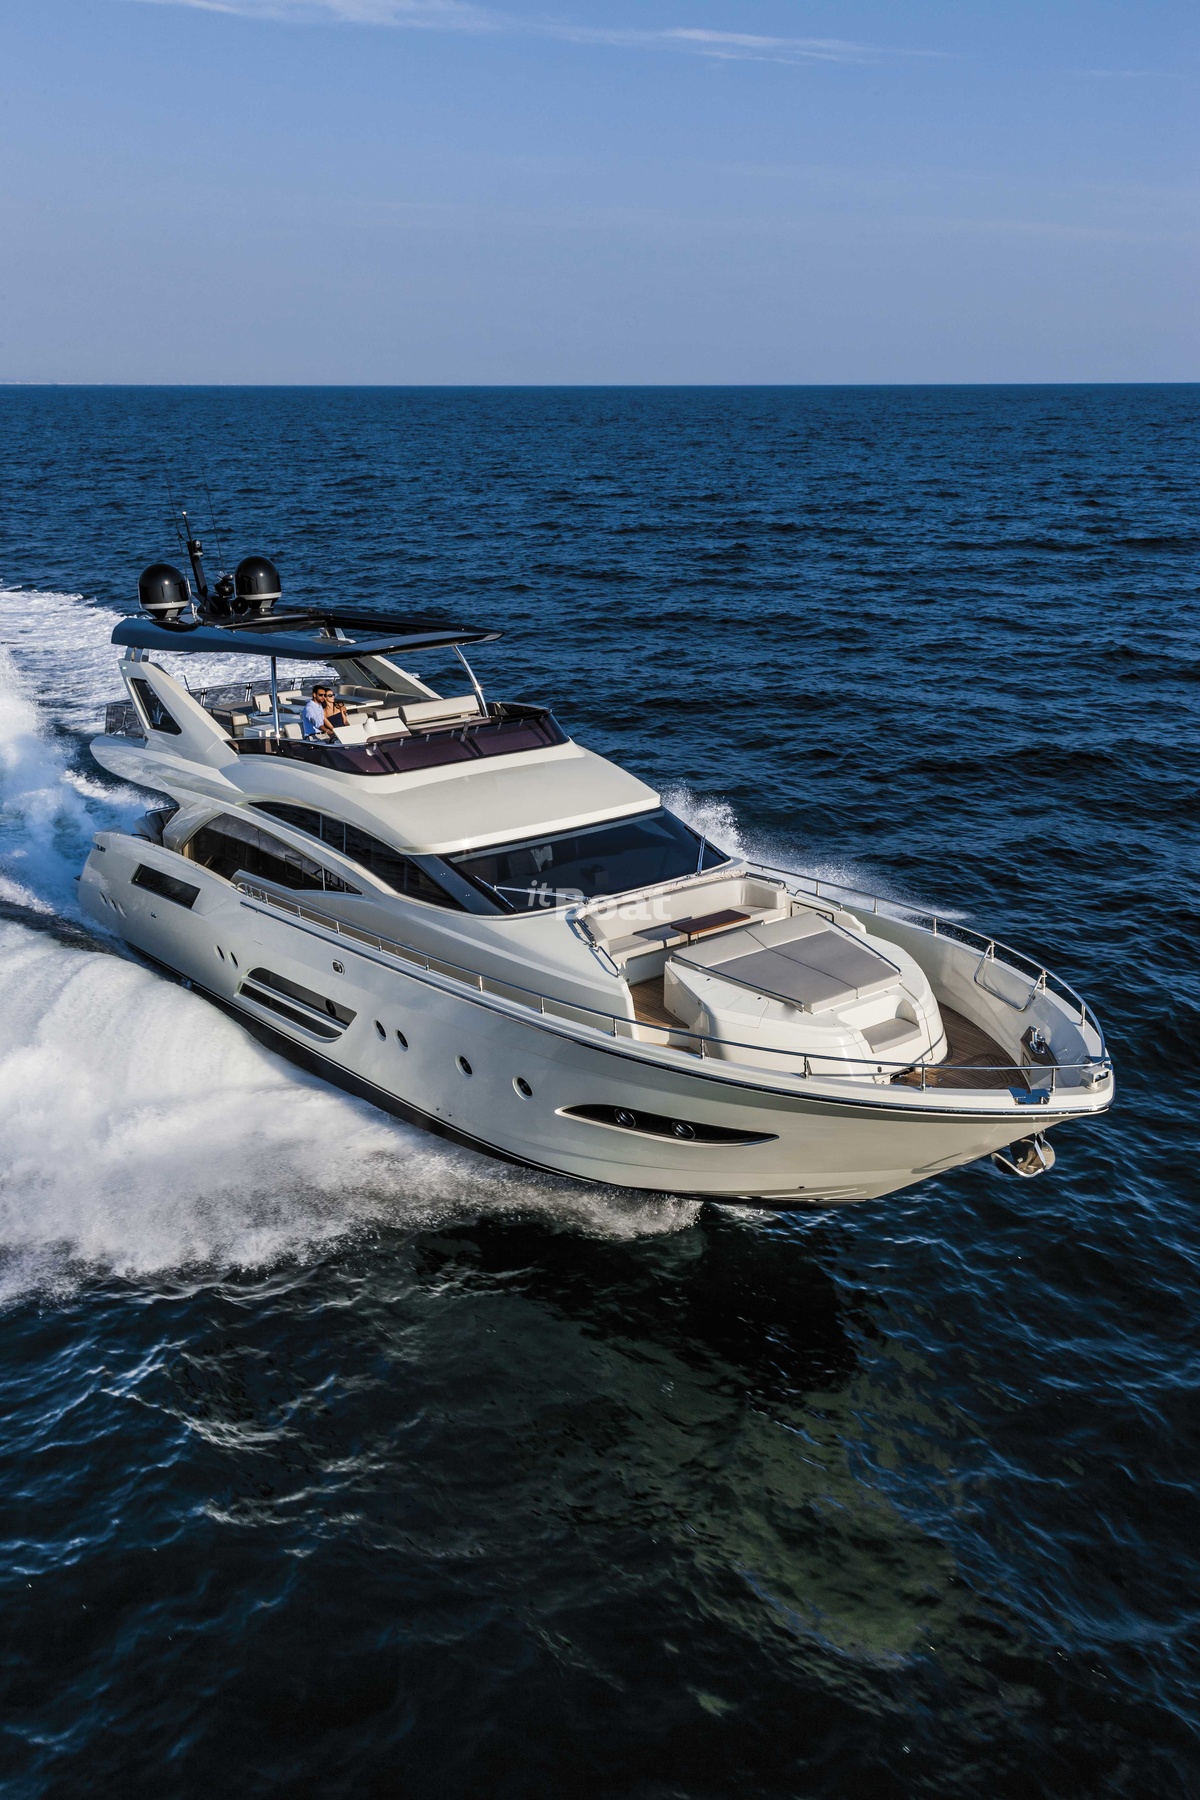 Dominator 800: Prices, Specs, Reviews and Sales Information - itBoat